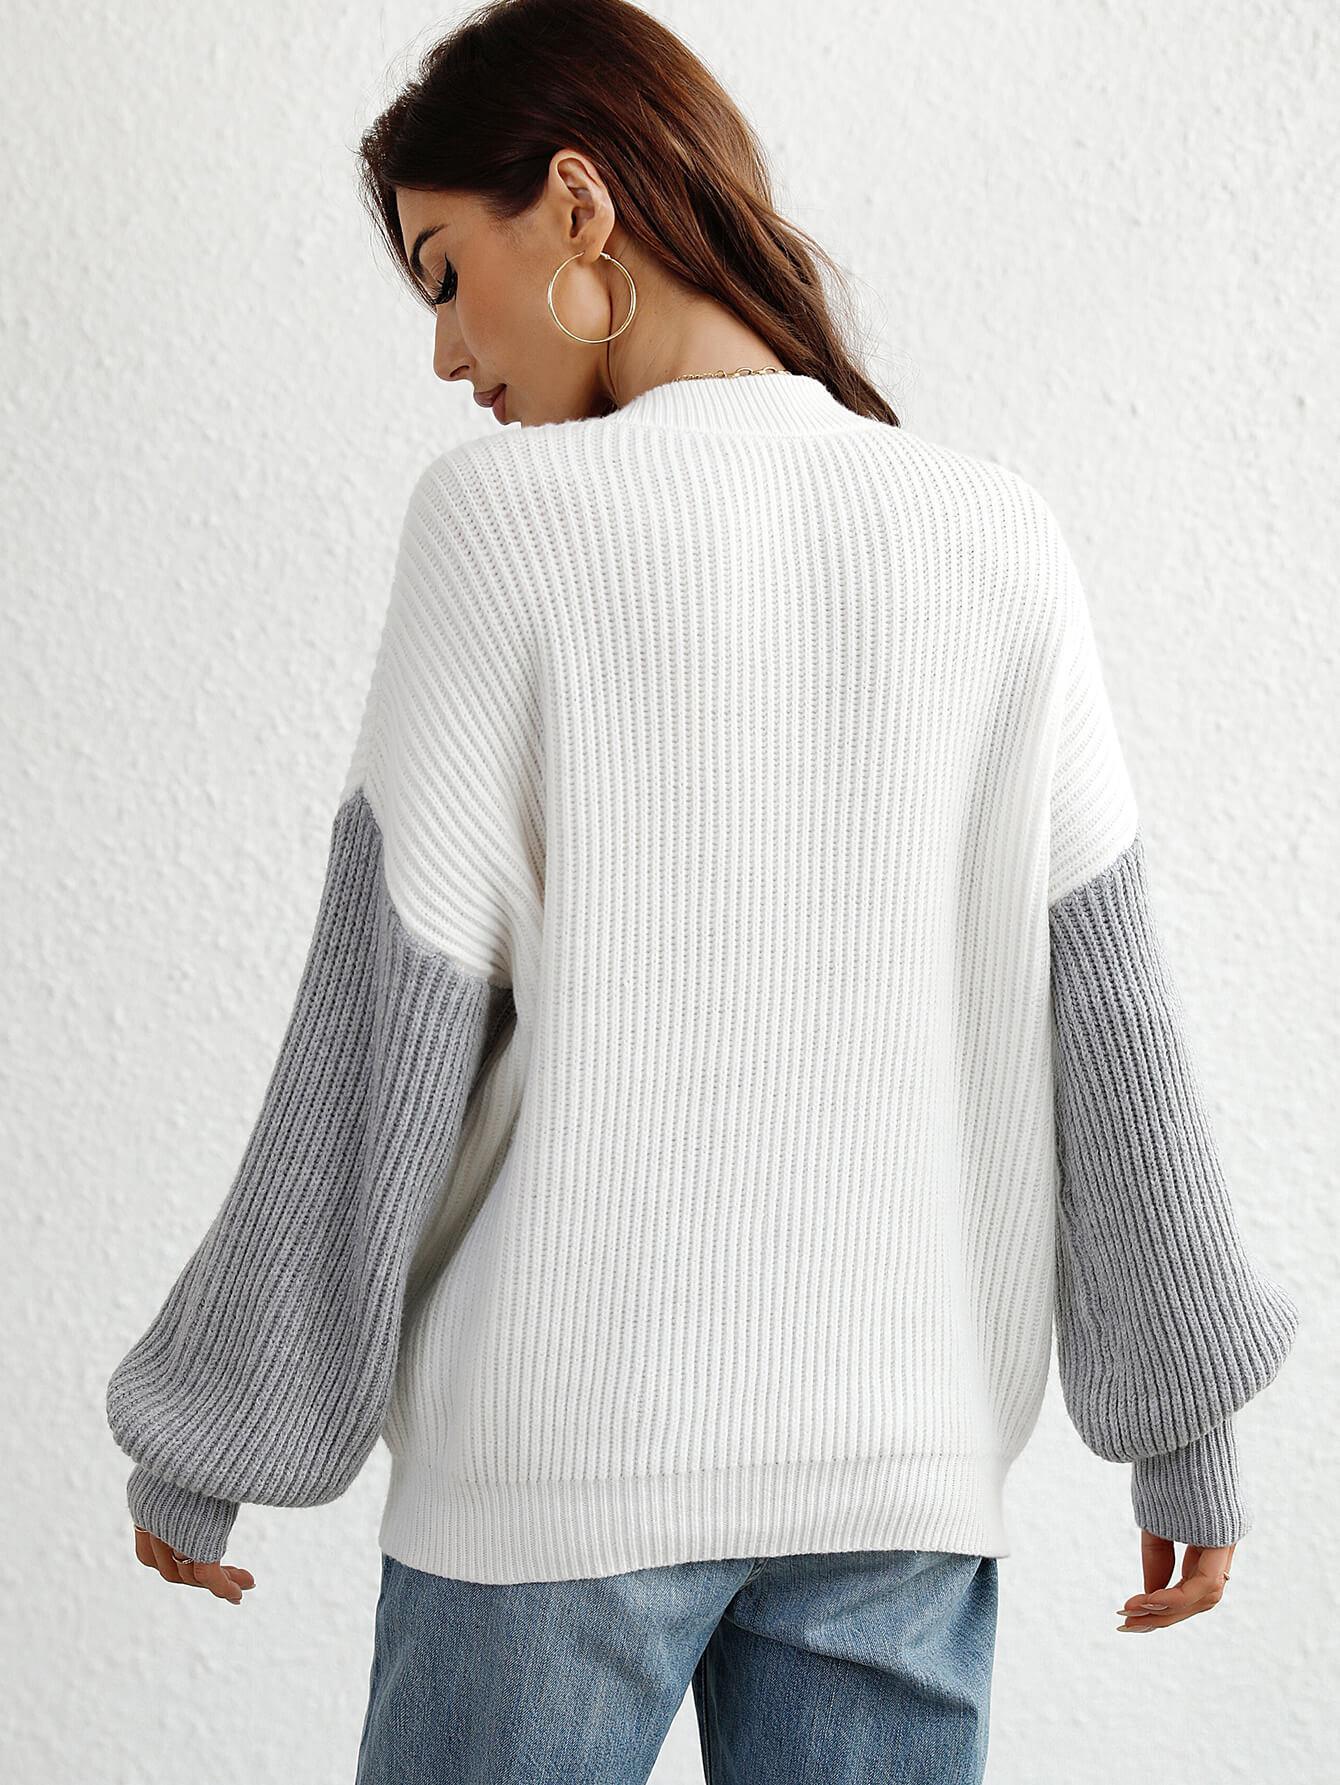 Spectacular Two-Tone Dropped Shoulder Rib Knit Sweater - MXSTUDIO.COM